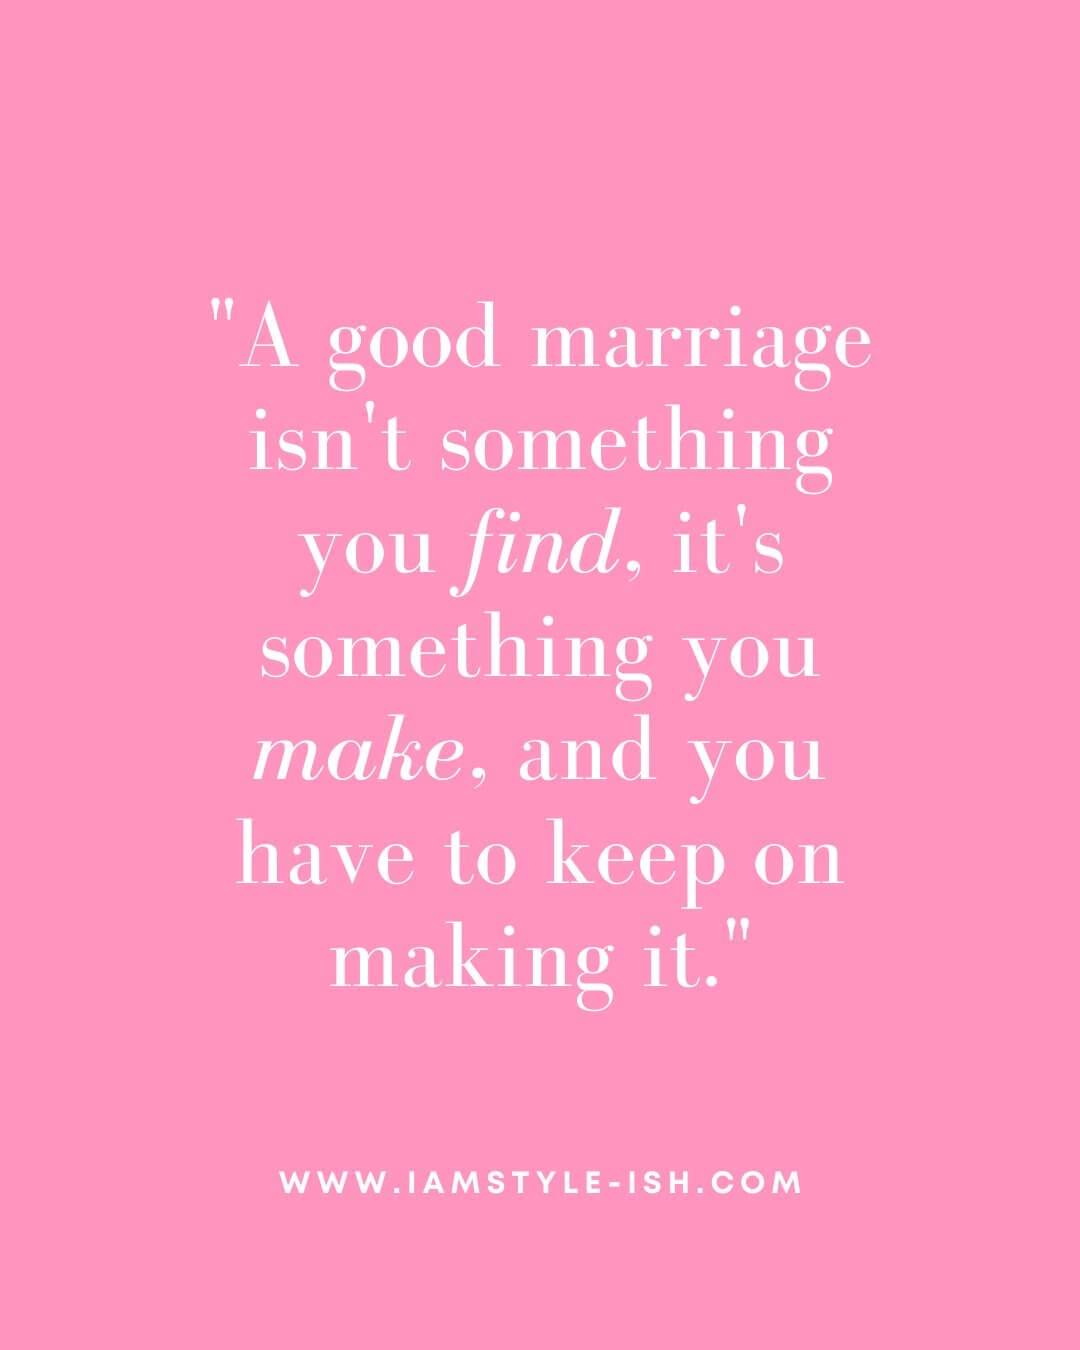 marriage quote